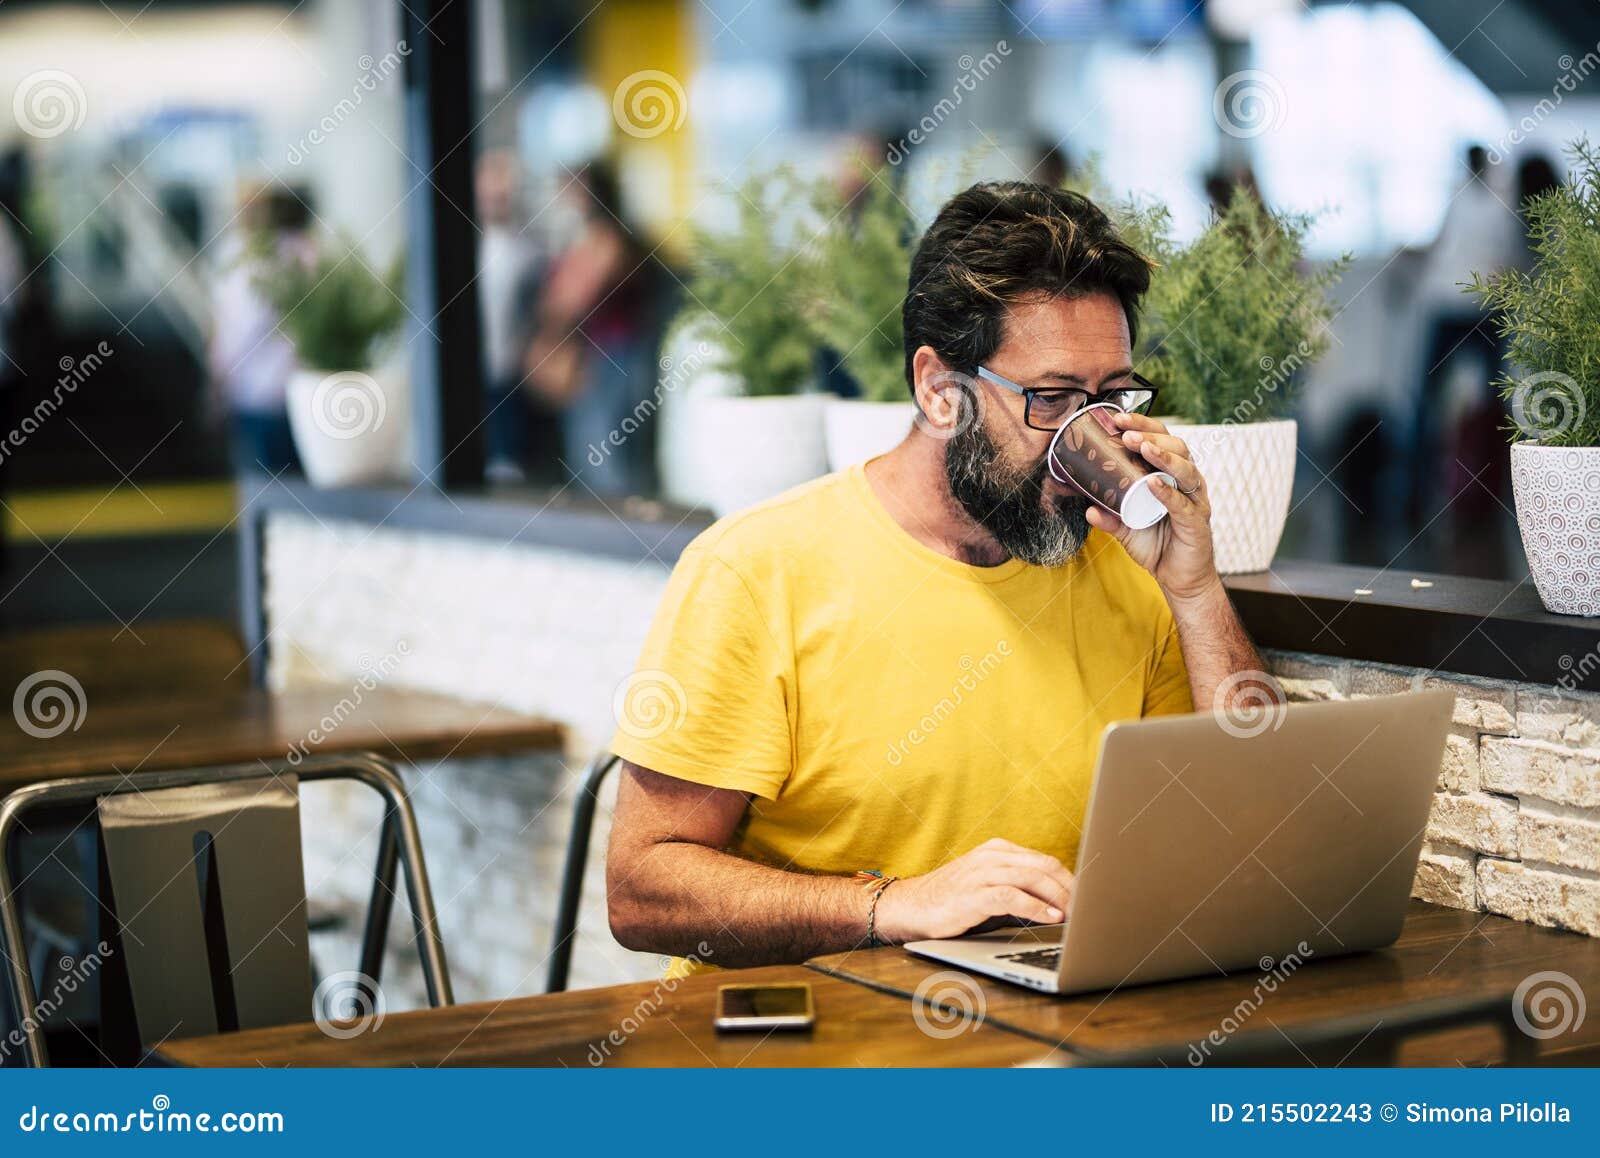 handsome hipster bearded man drink coffee at the coworking space and work with laptop computer and internet free wifi connection